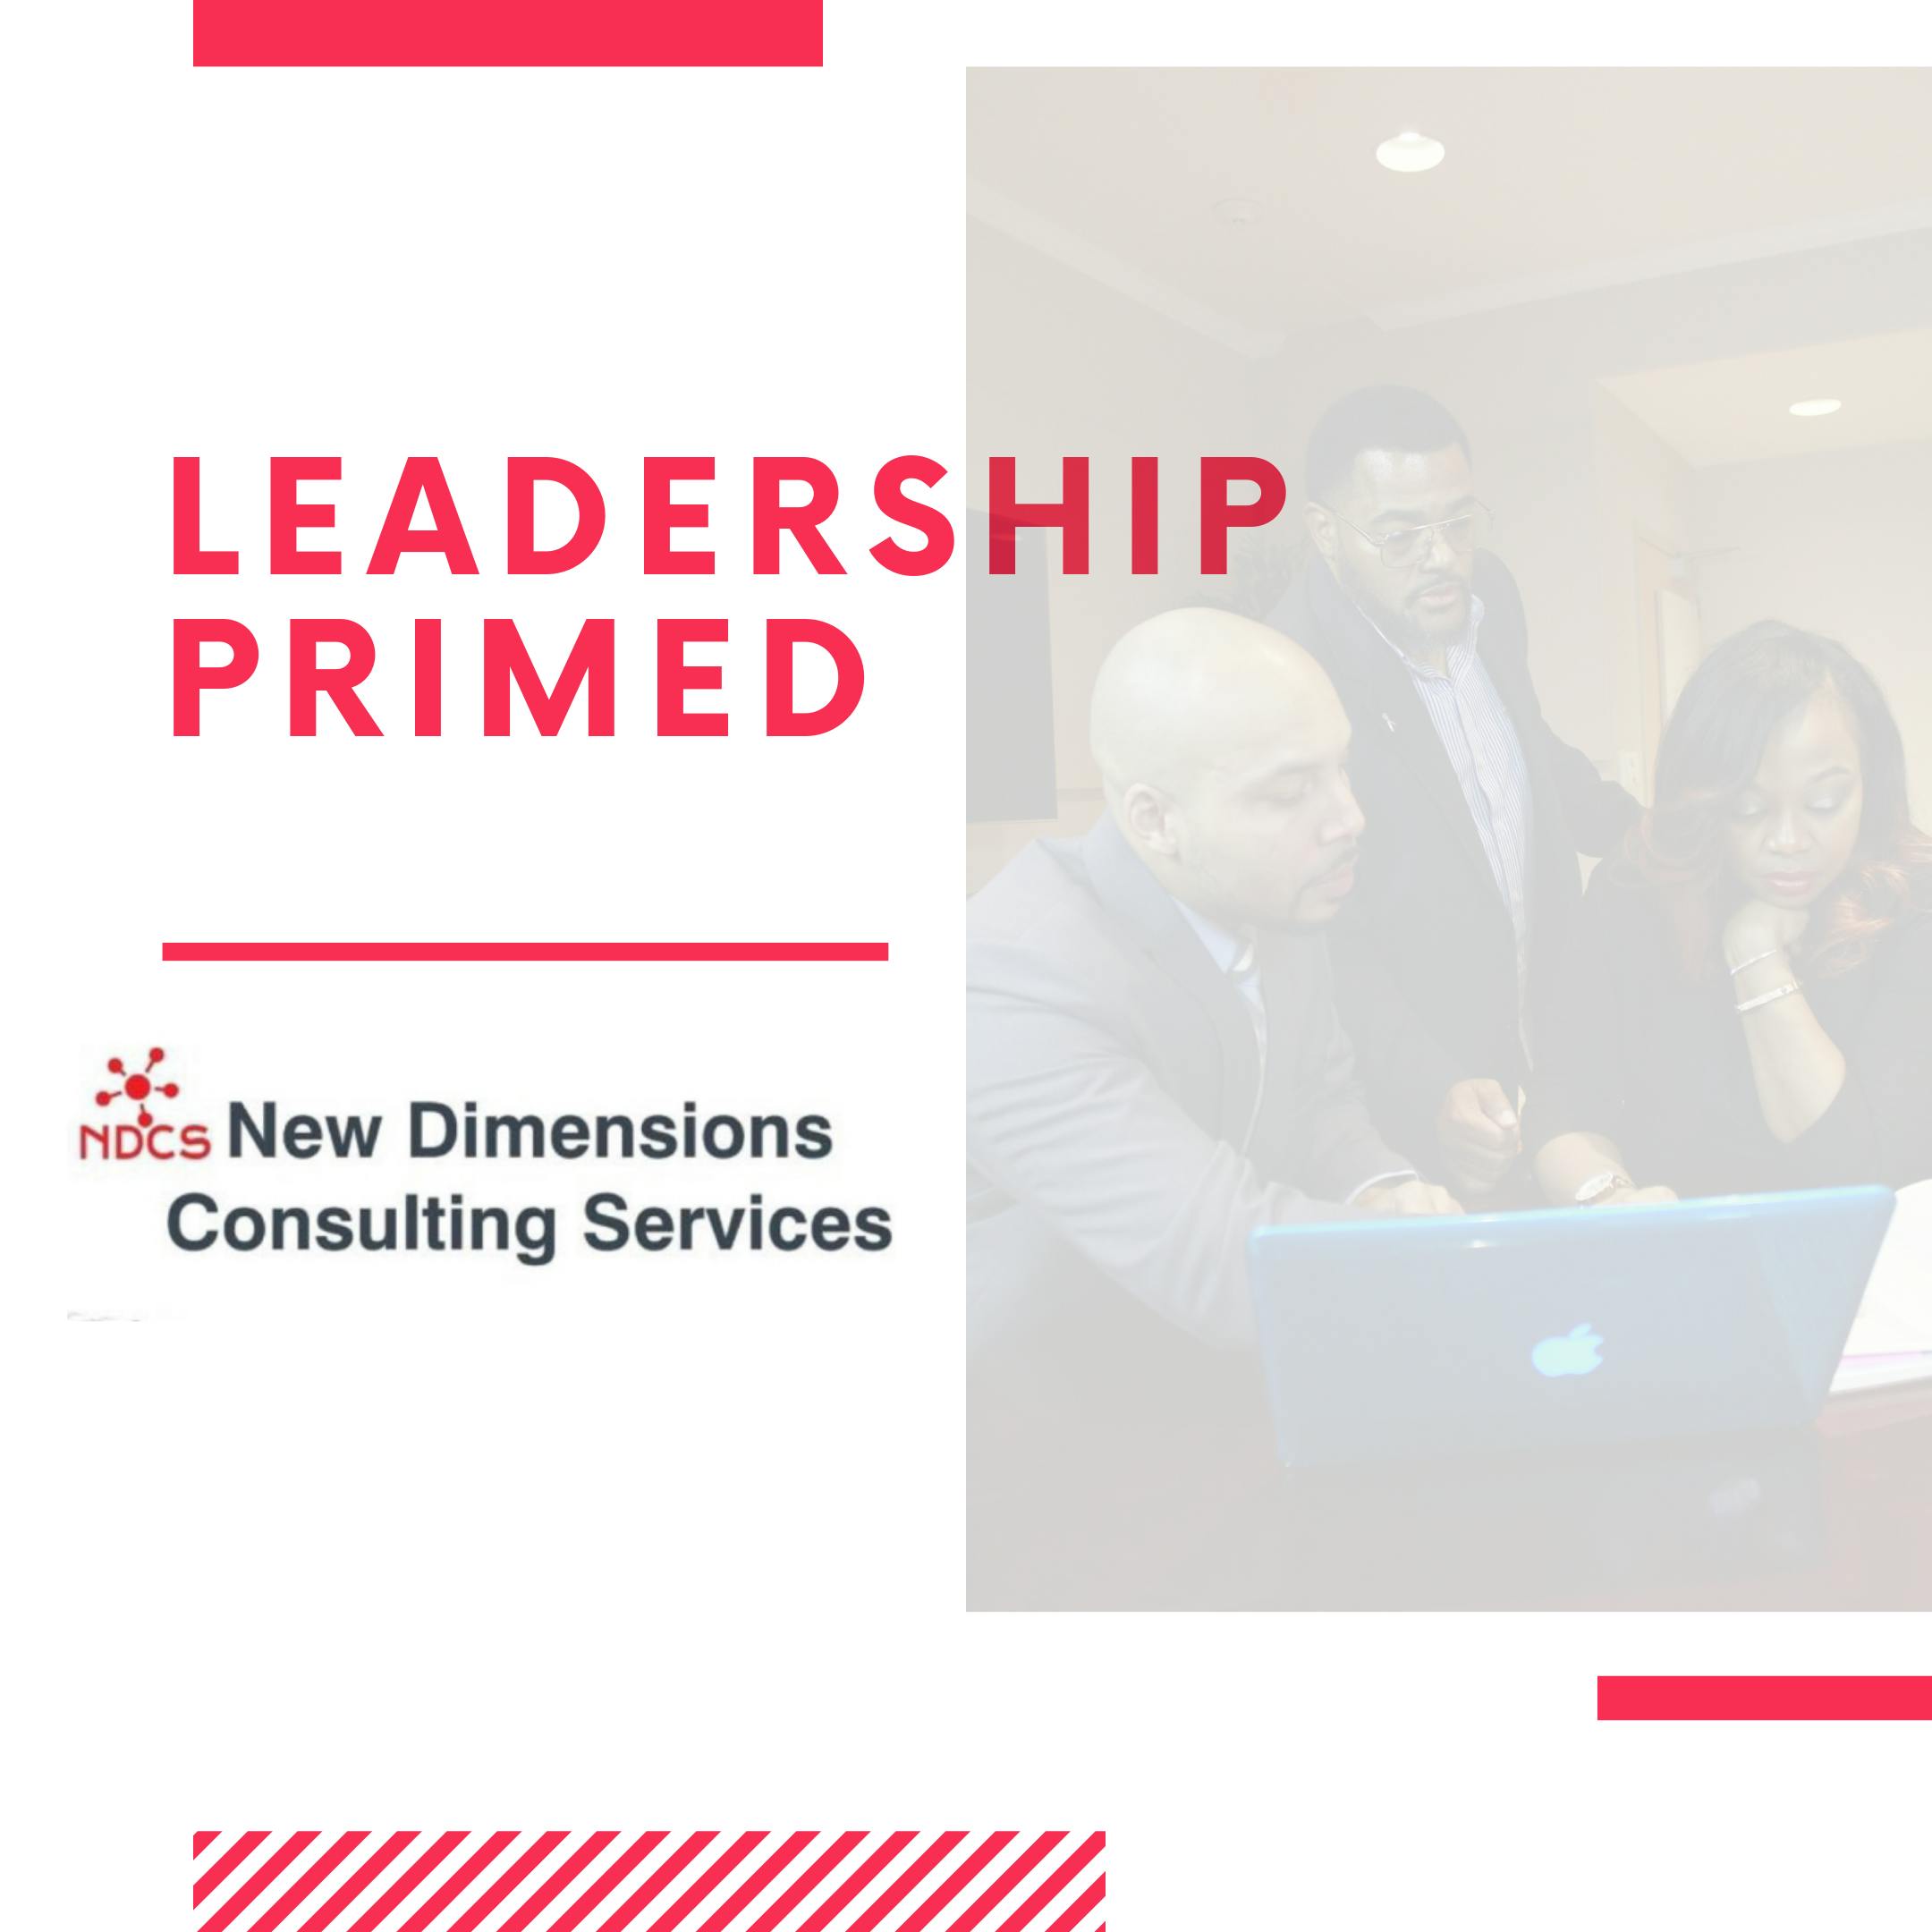 New Dimensions Consulting Services Presents: Leadership Primed